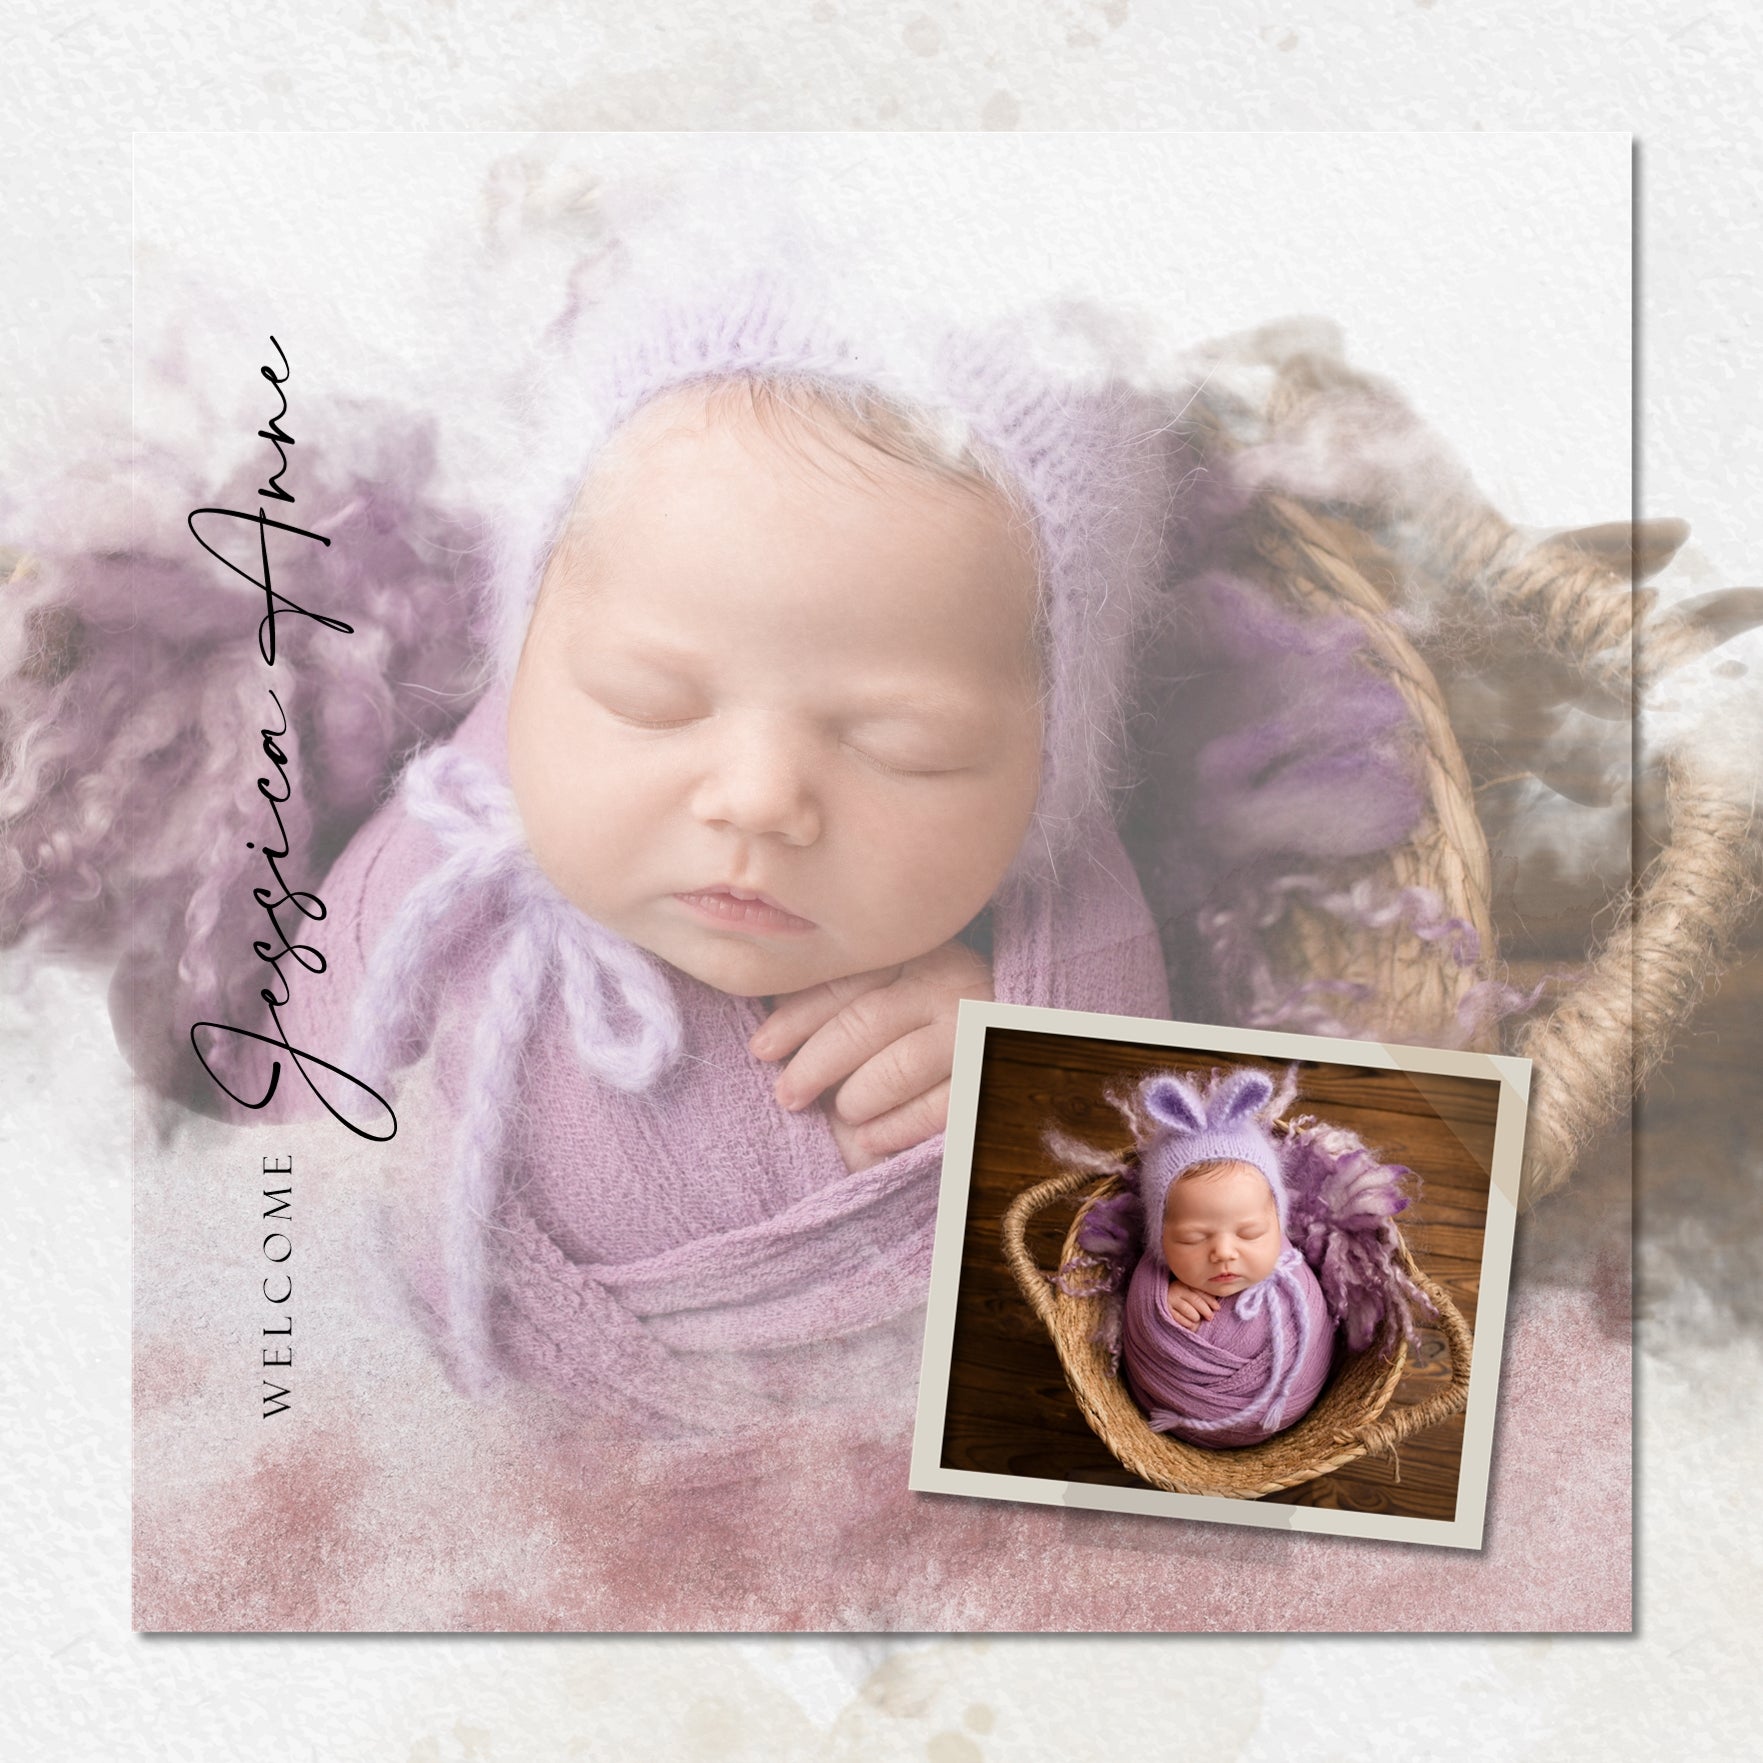 Capture the special moments of your baby through the toddler years with these neutral watercolor digital scrapbooking papers by Lucky Girl Creative digital art. Create unique baby announcements, baby shower gifts, and even Baby's 1st Year albums. Great for everyday use and can easily be colorized to fit your needs.